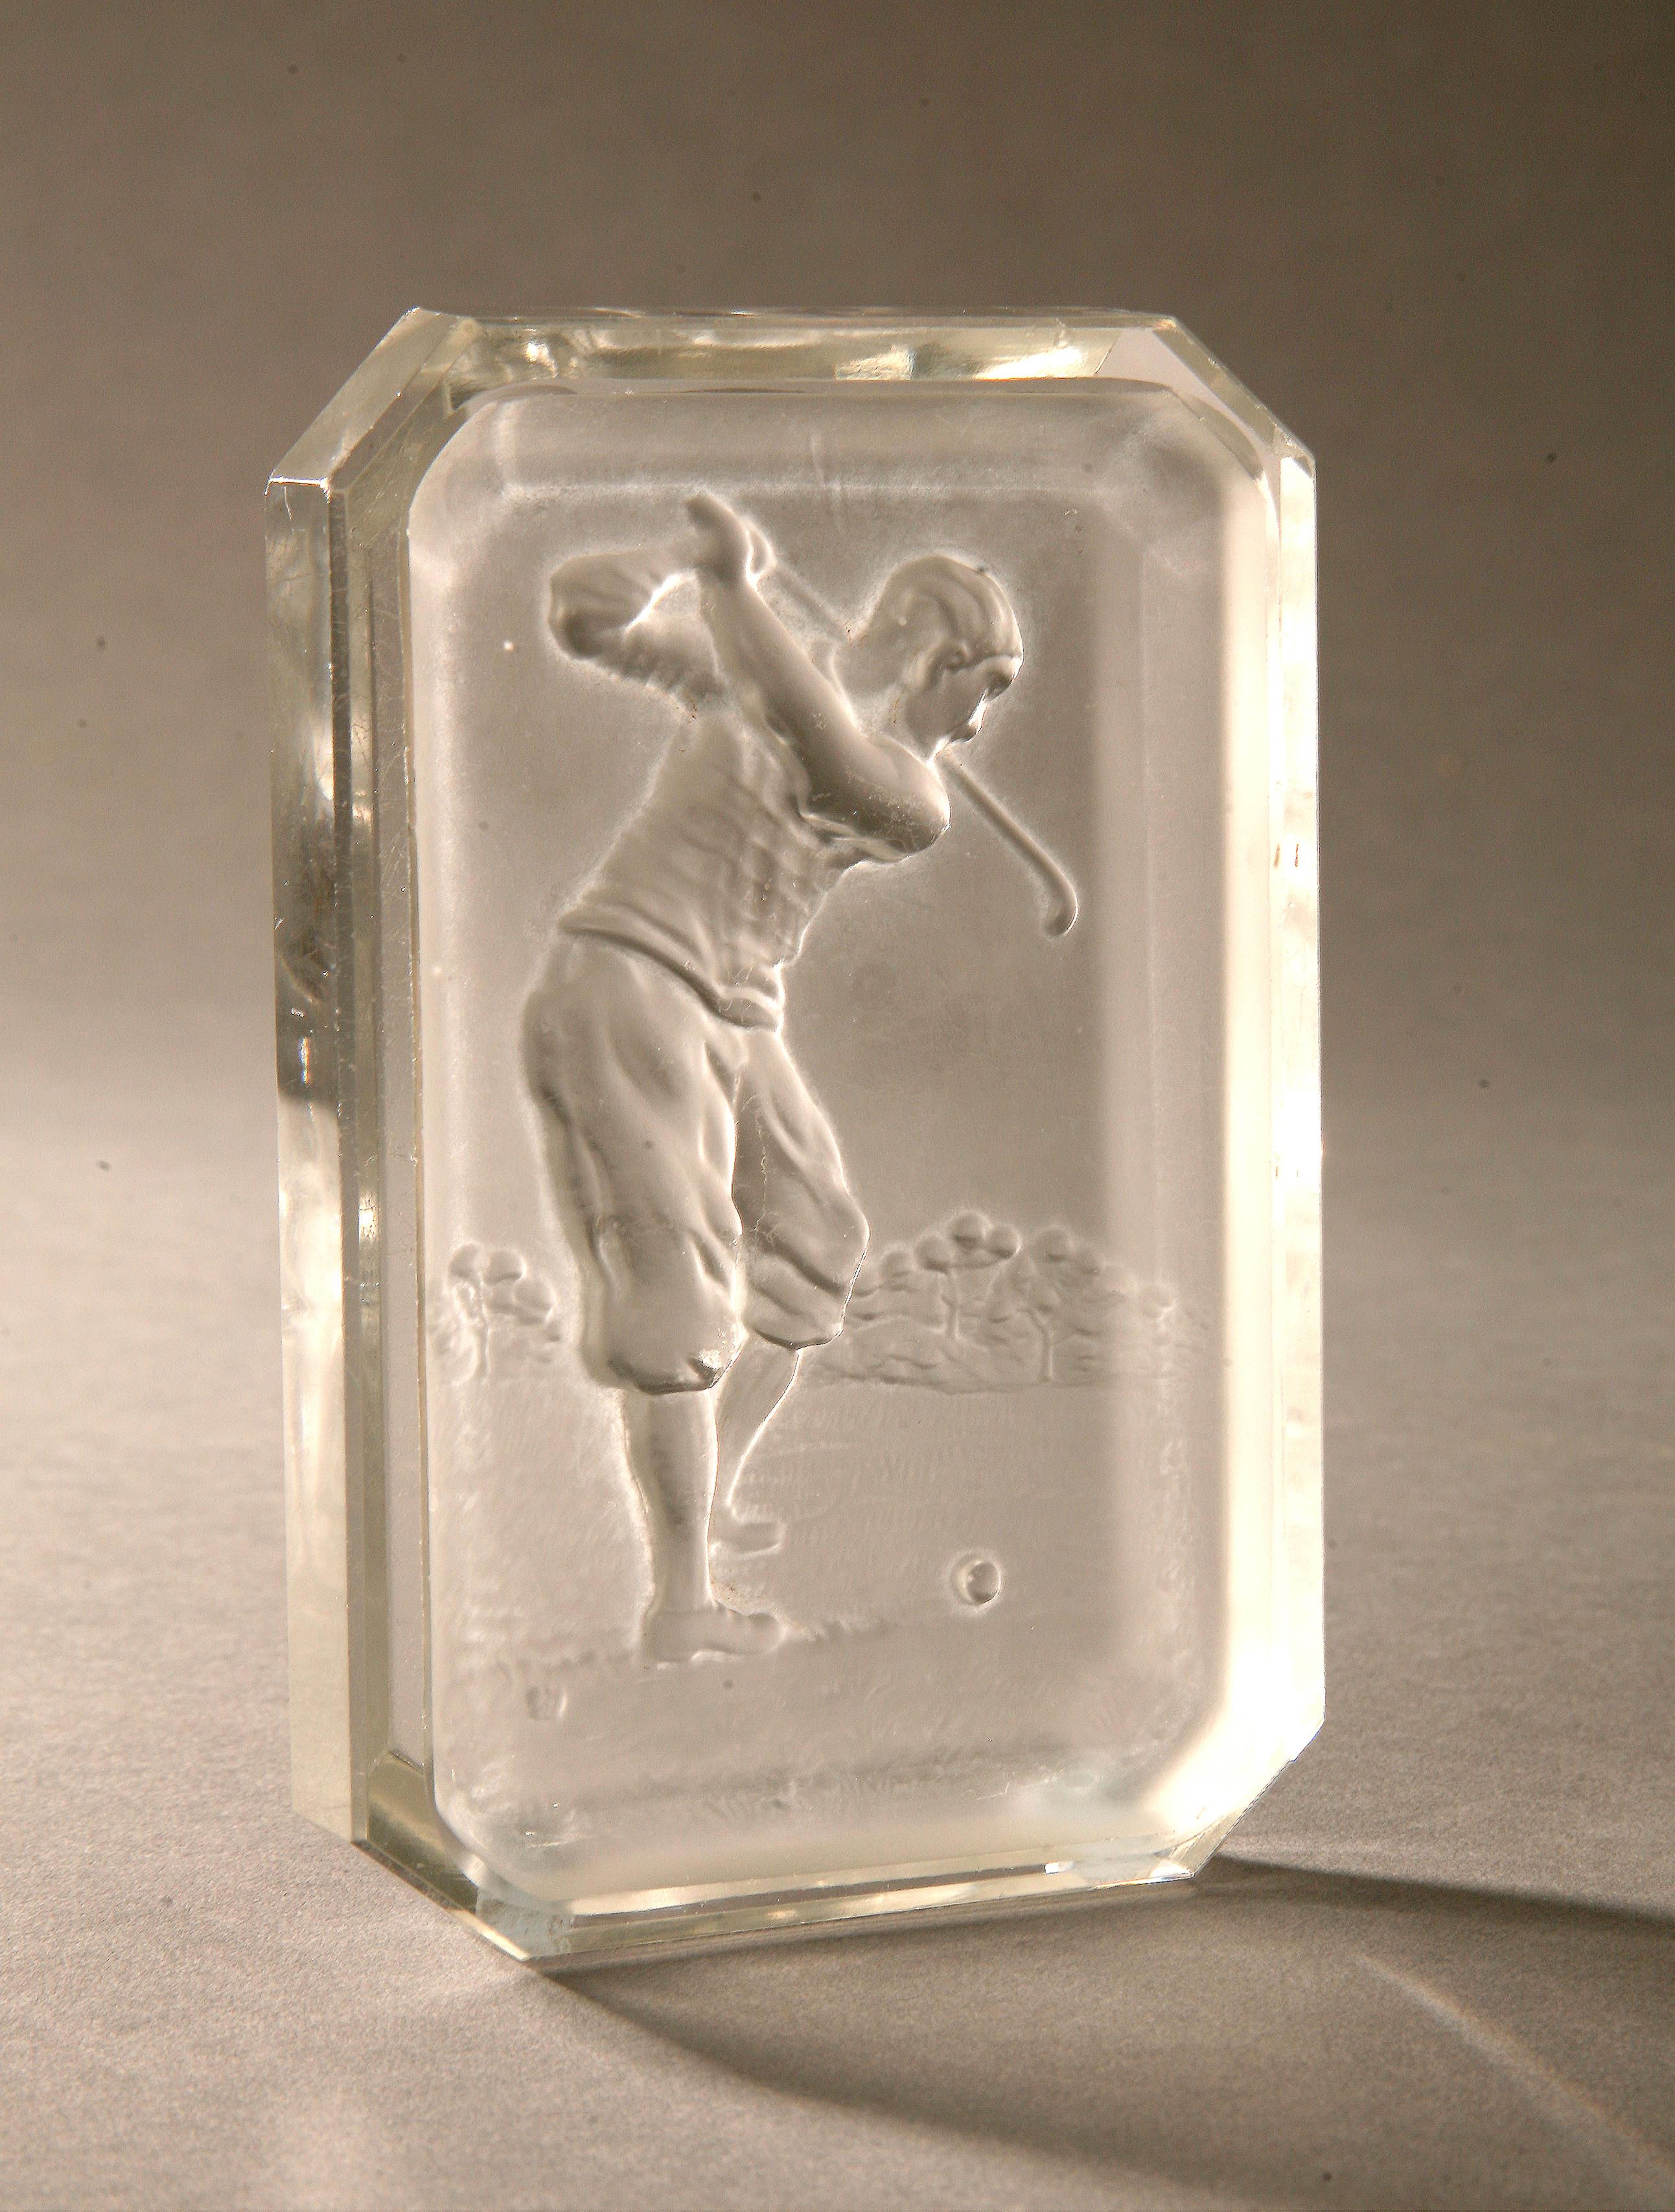 Vintage golf Baccarat glass pin tray.
An original glass Baccarat pin tray, ashtray, with relief golfer in the base. The golfer is in full backswing and the piece is marked with the small Baccarat butterfly mark. The rectangular glass tray is in